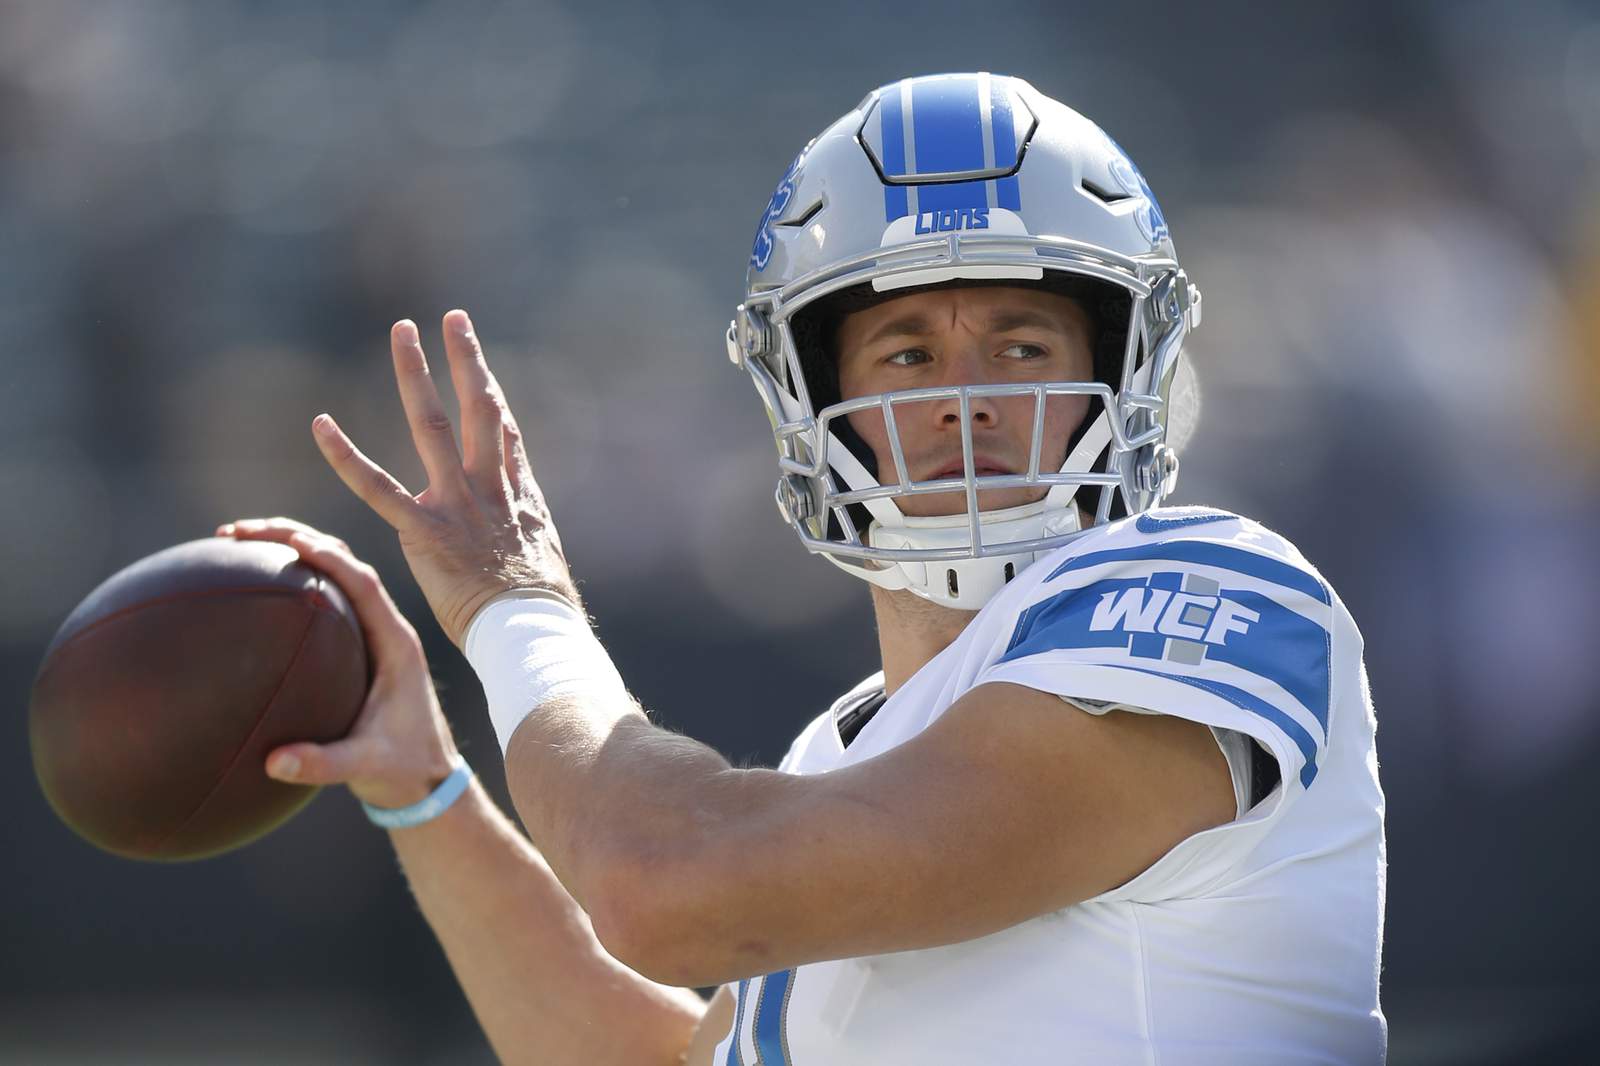 Stafford says he didn't give much thought to opting out